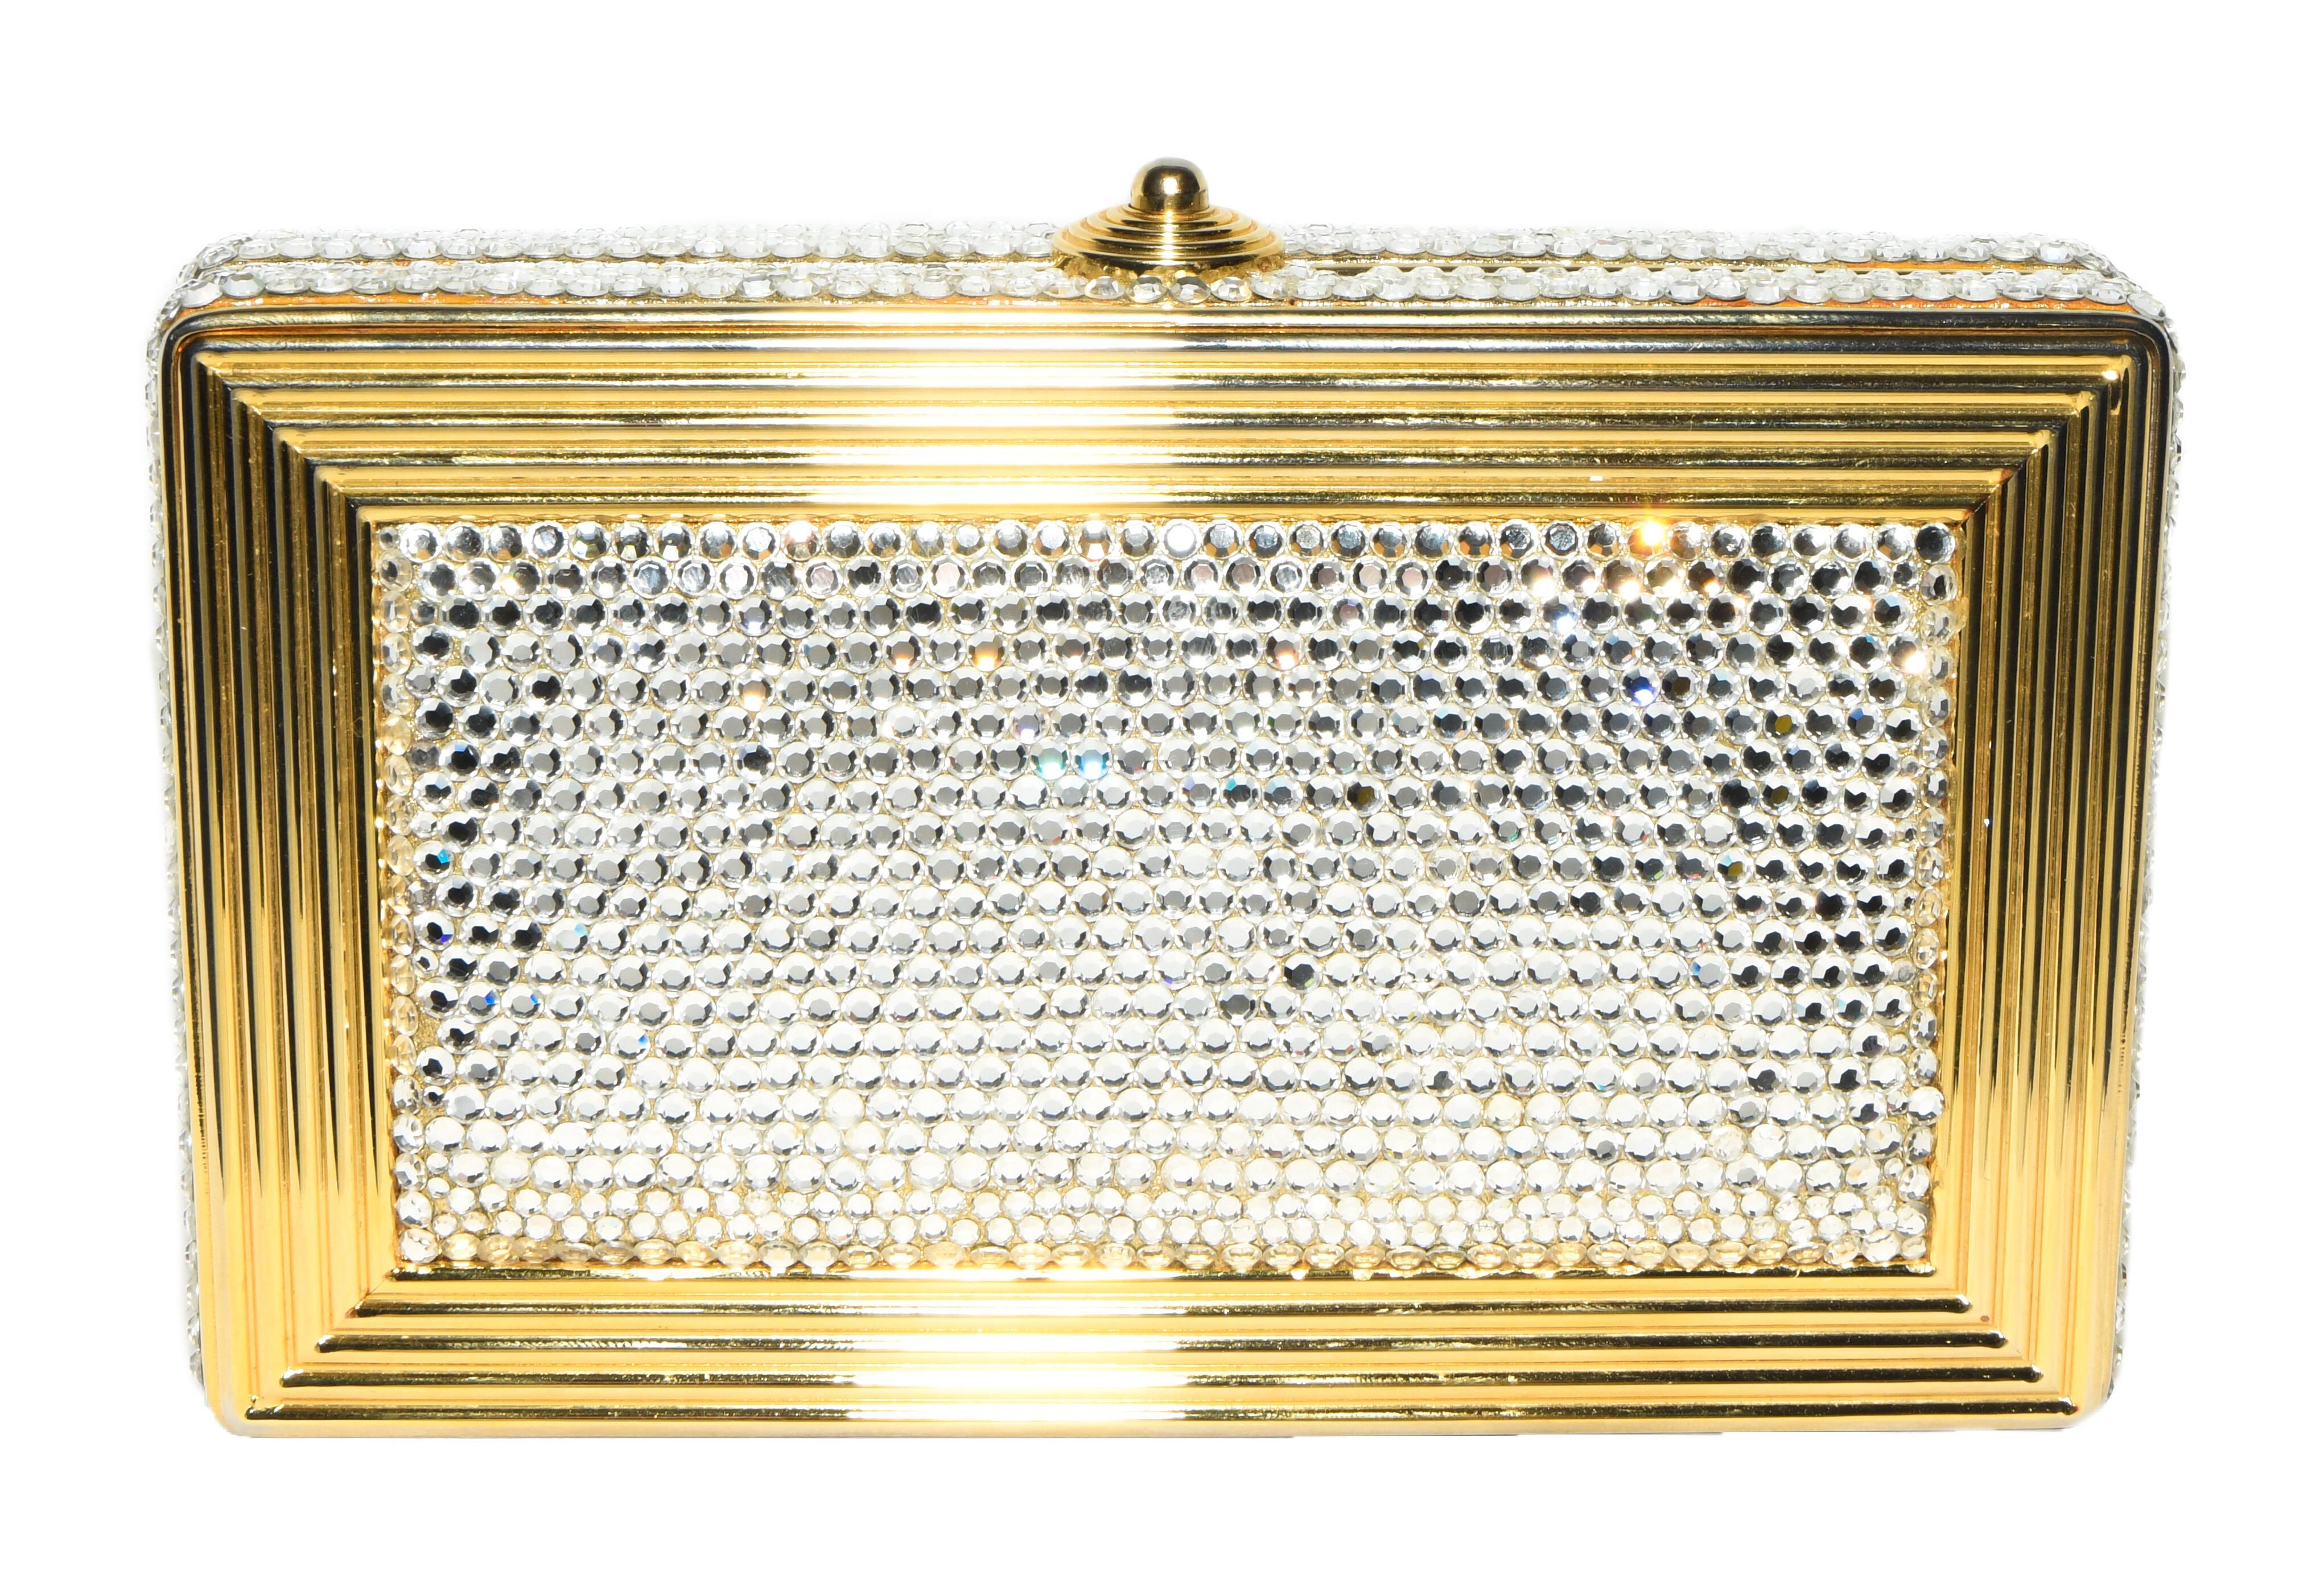 Judith Leiber crystal and gold tone metal minaudiere with top push button closure and includes a gold tone shoulder strap chain.  This Judith Leiber silver  Swarovski crystal clutch bag is lined in gold tone leather.  This elegant clutch is encased